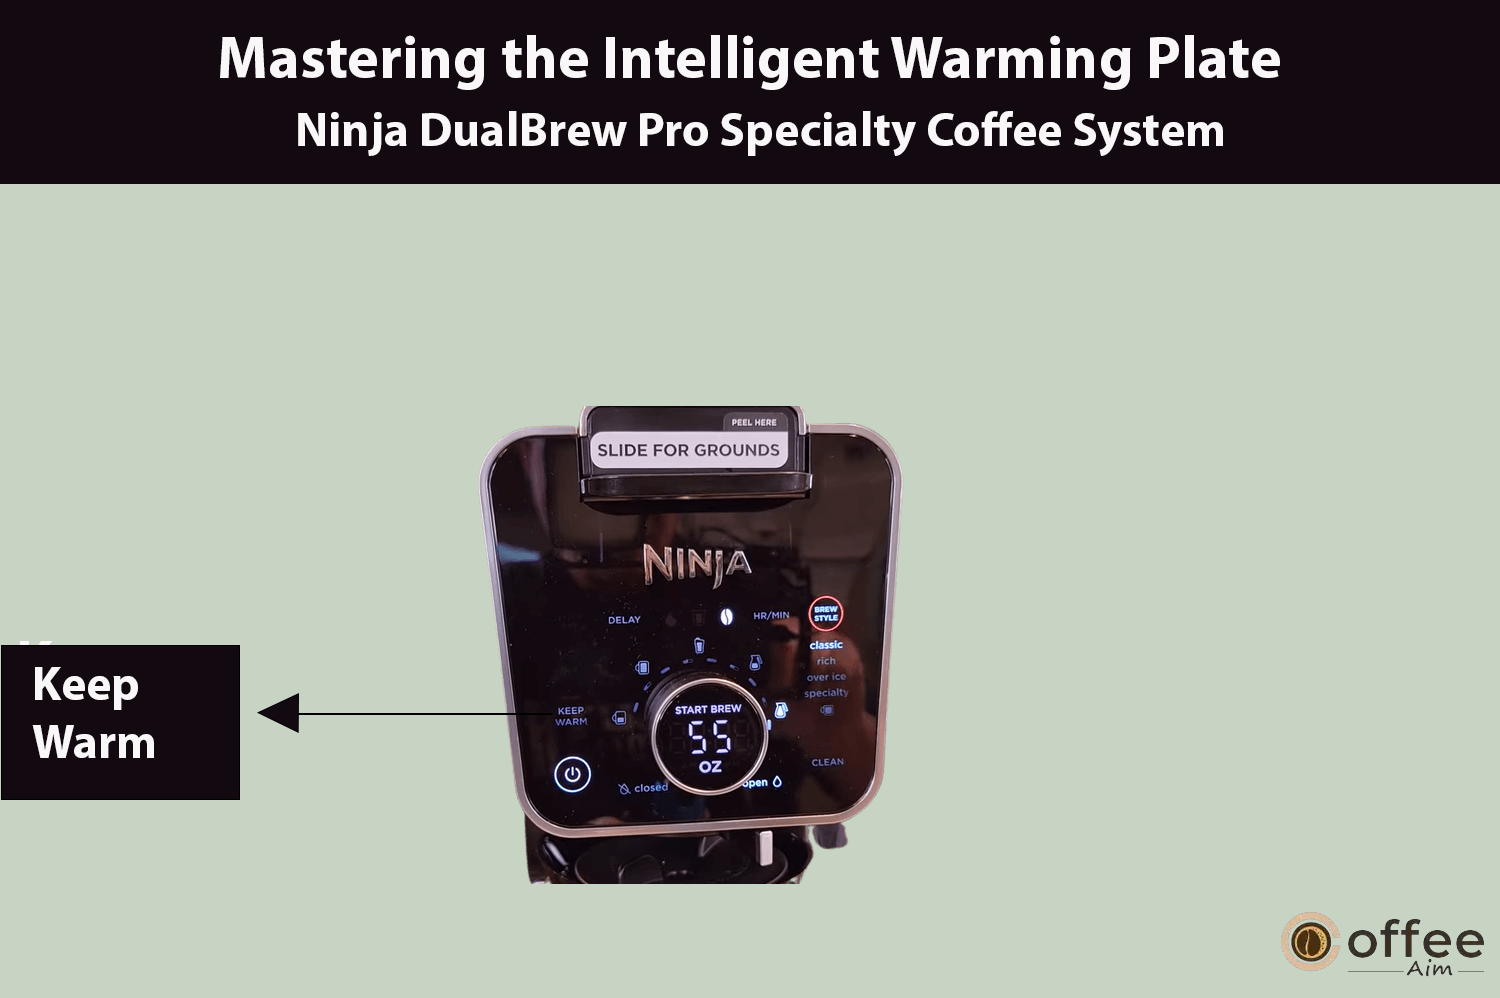 "This image illustrates the intelligent warming plate feature of the Ninja DualBrew Pro Specialty Coffee System, as explored in the article 'How to Use Ninja DualBrew Pro Specialty Coffee System, Compatible with K-Cup Pods, and 12-Cup Drip Coffee Maker.'"